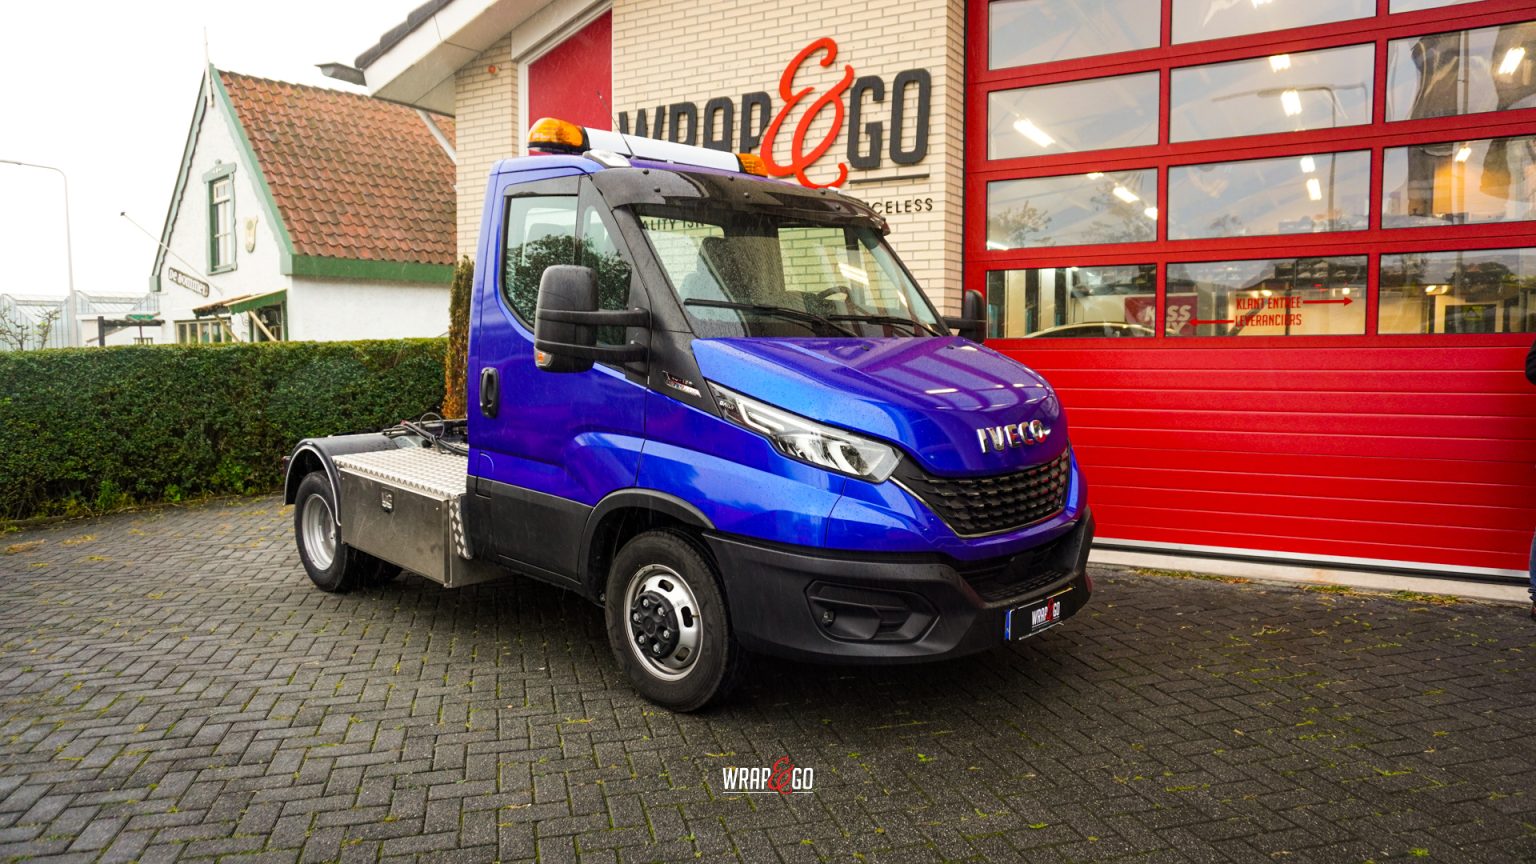 iveco-truck-wrapping-lettering-the-lorry-westland-wrapandgo1